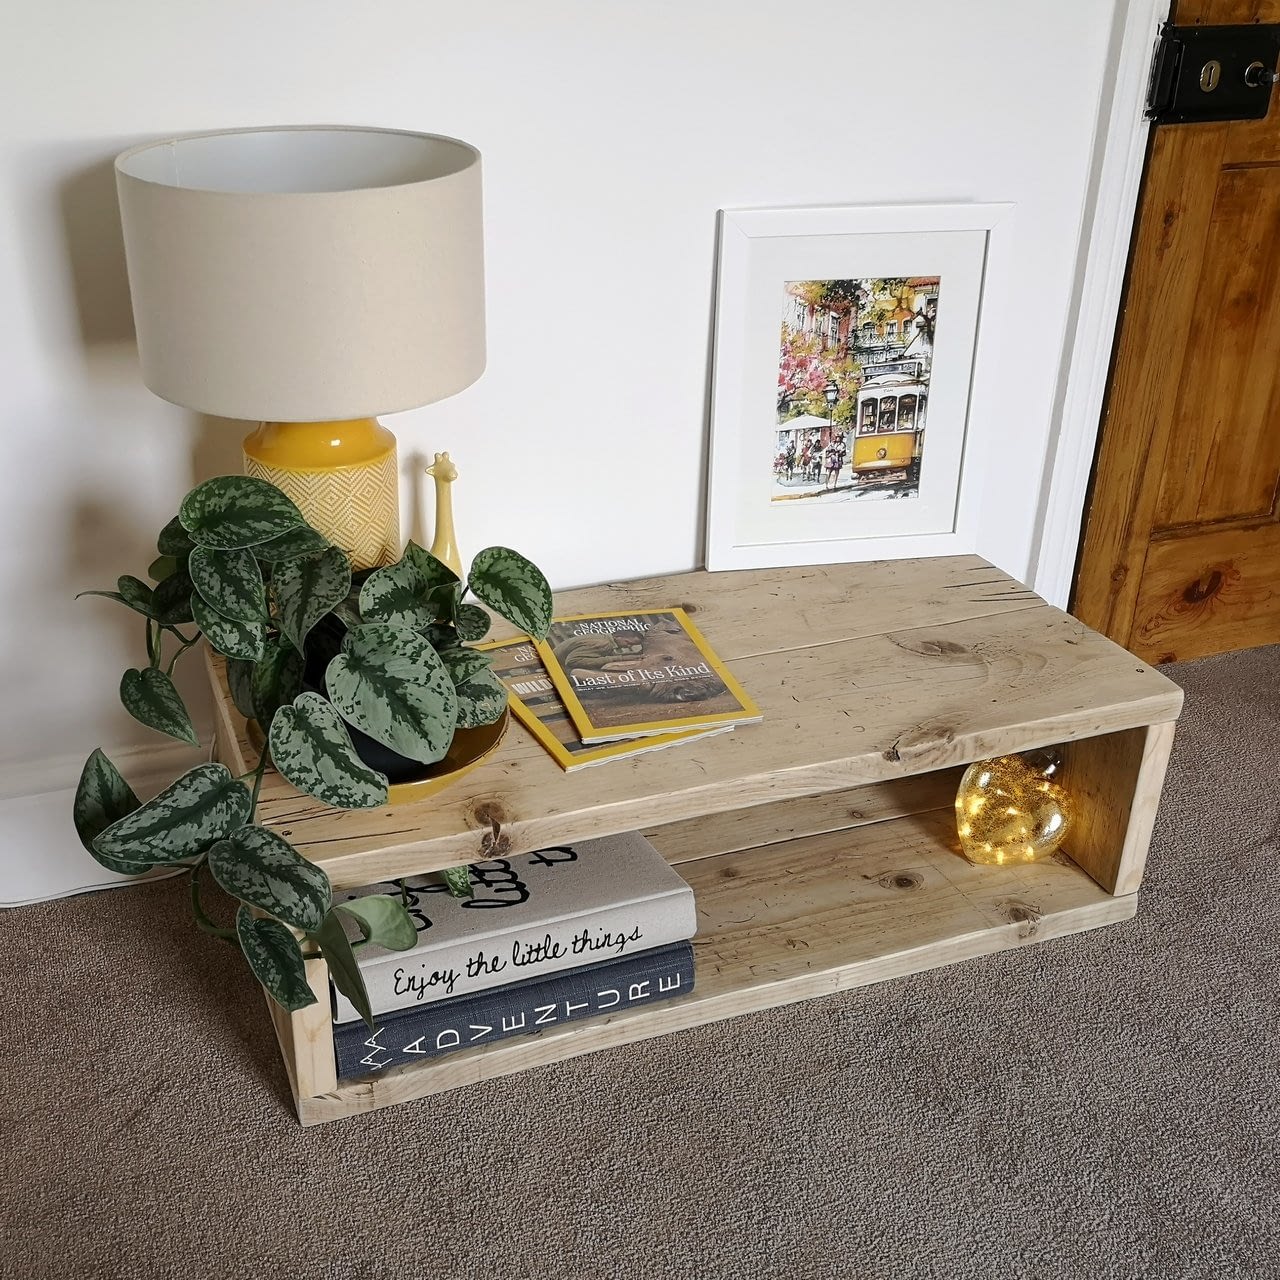 Barlow A Low Profile Coffee Table The Woodshed Store Uk Ltd